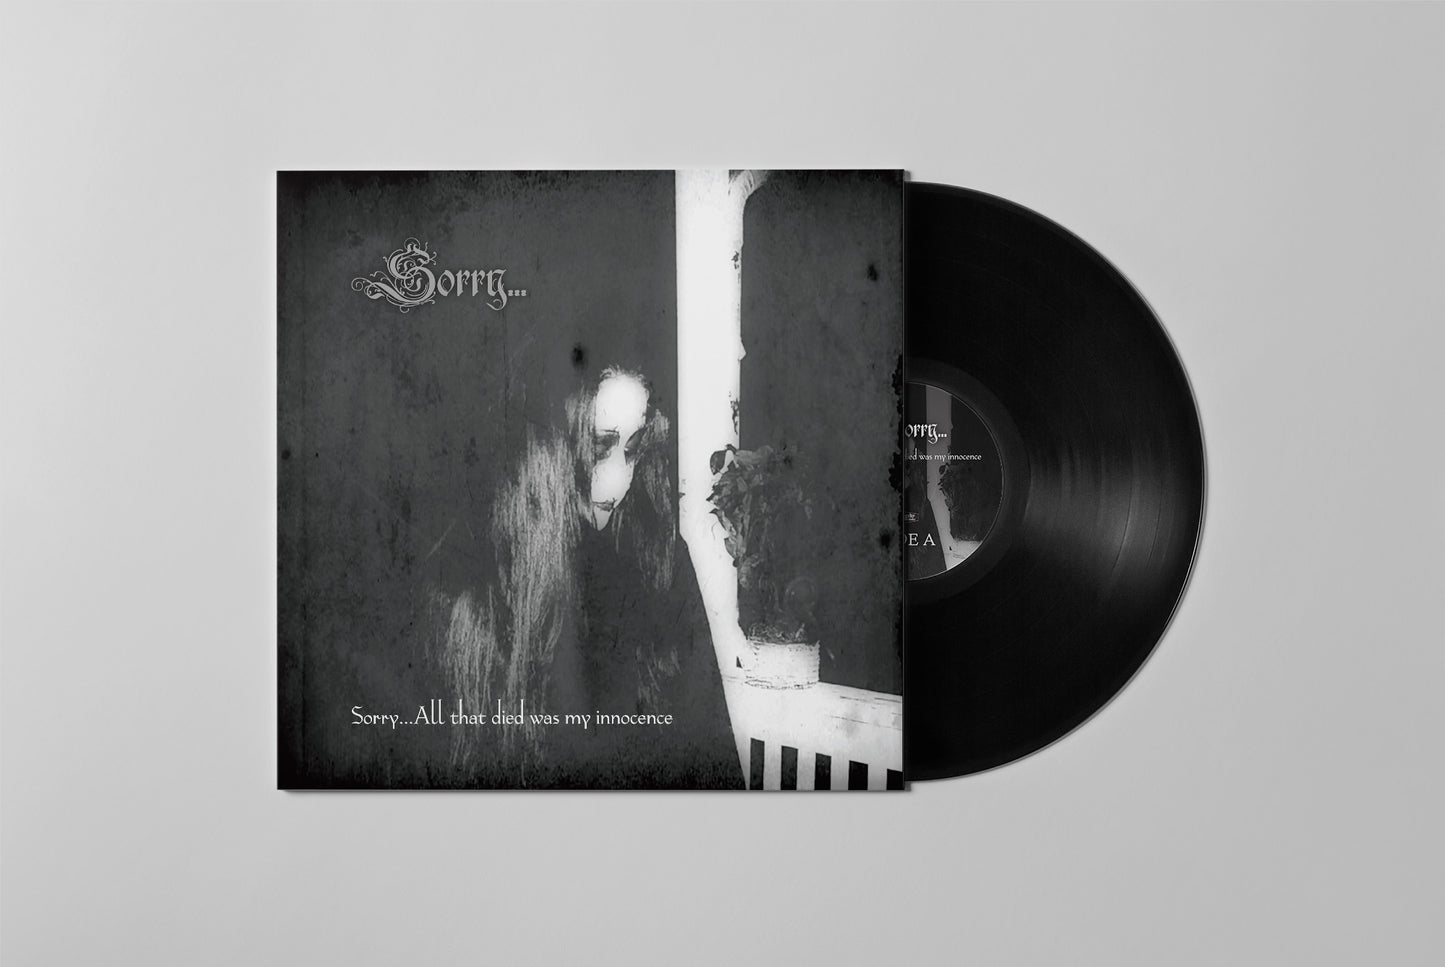 SORRY... - All That Died Was My Innocence + Self Inflicted Razor Cutting (2 x 12" Bundle)